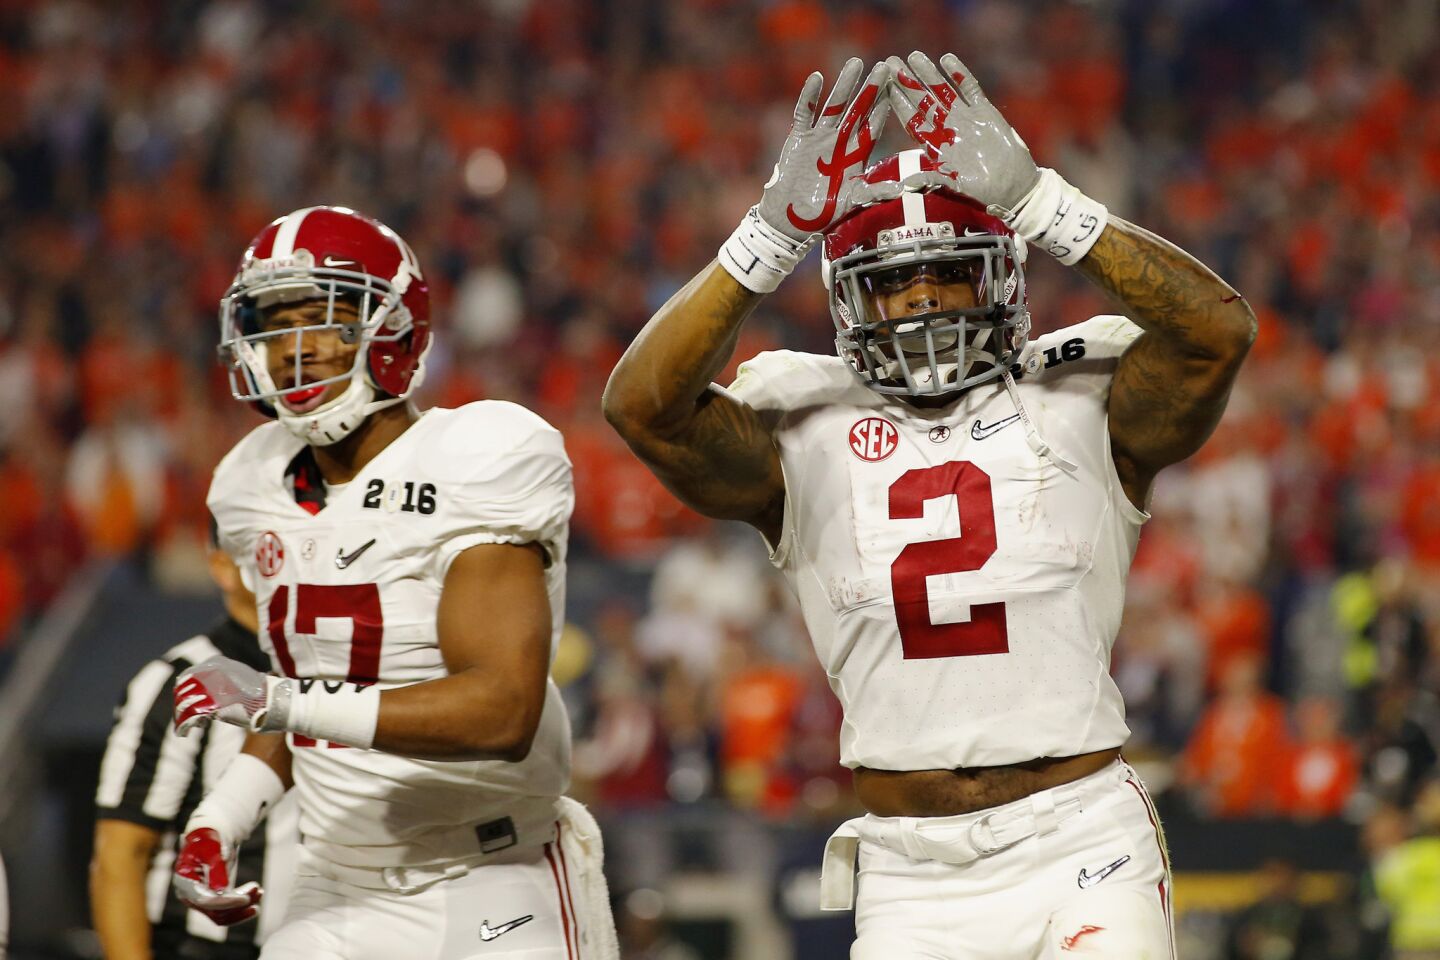 Alabama running back Derrick Henry celebrates after scoring on a 50-yard touchdown run during the College Football Playoff championship game on Jan. 11.